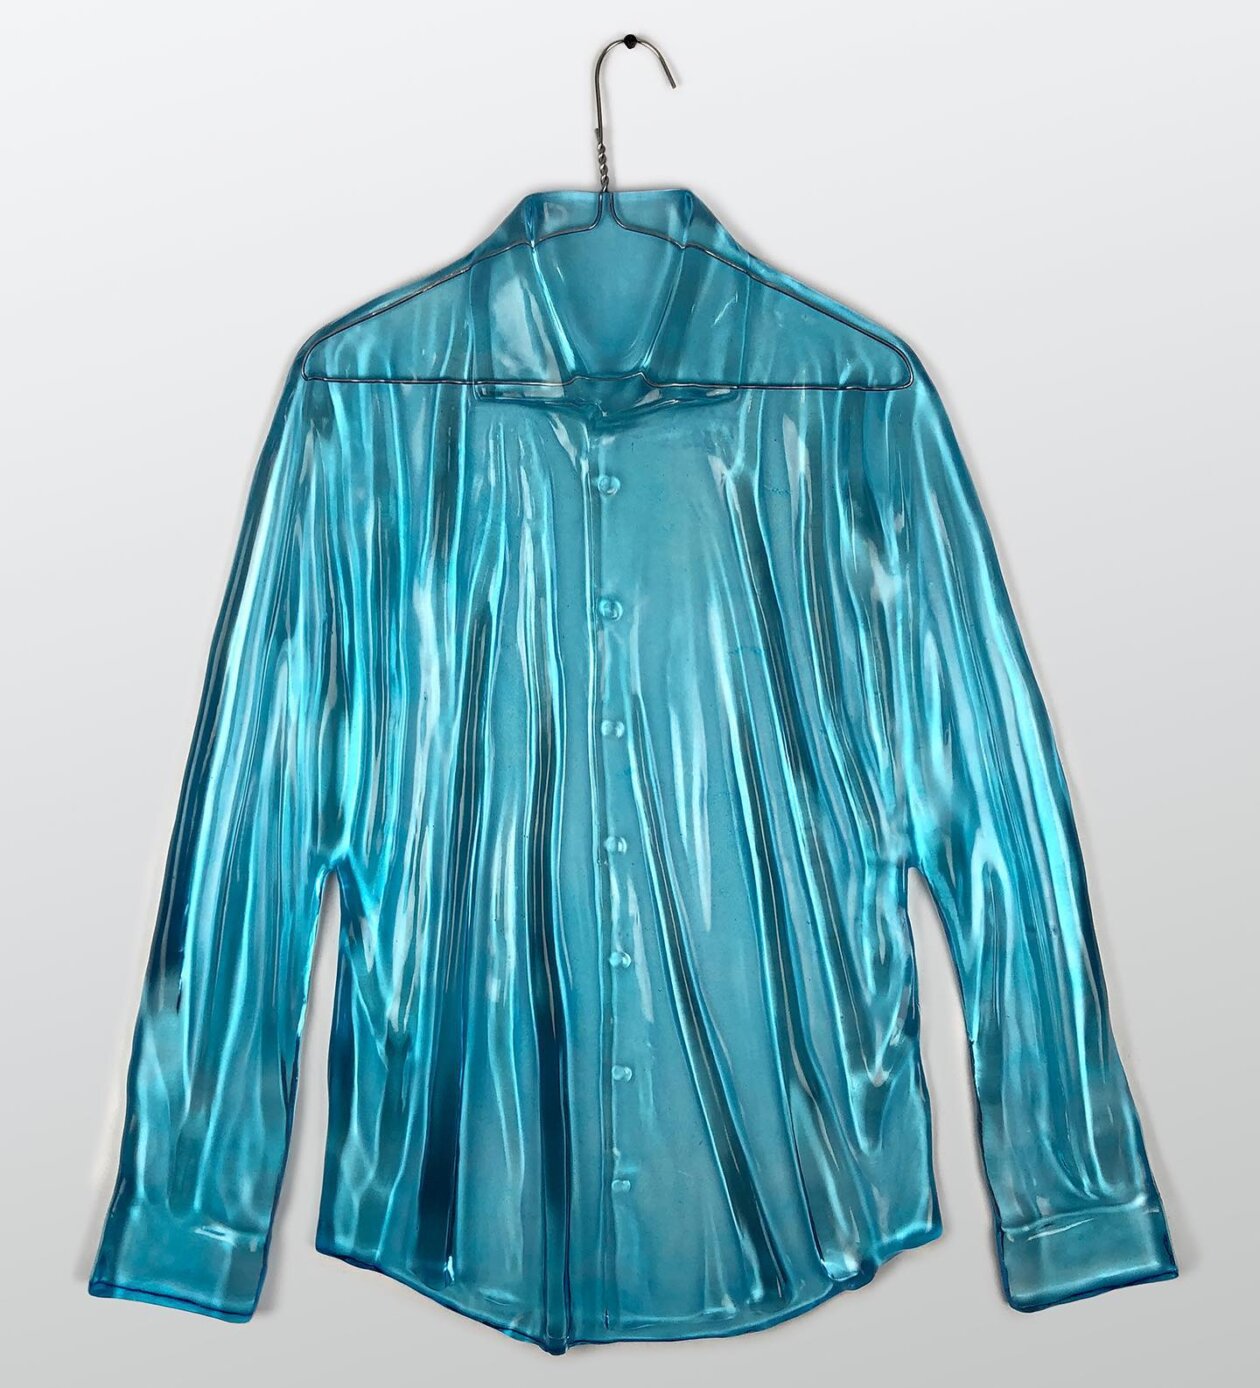 Clear Resin Sculptures Of Clothes And Objects By Chris Bakay (6)